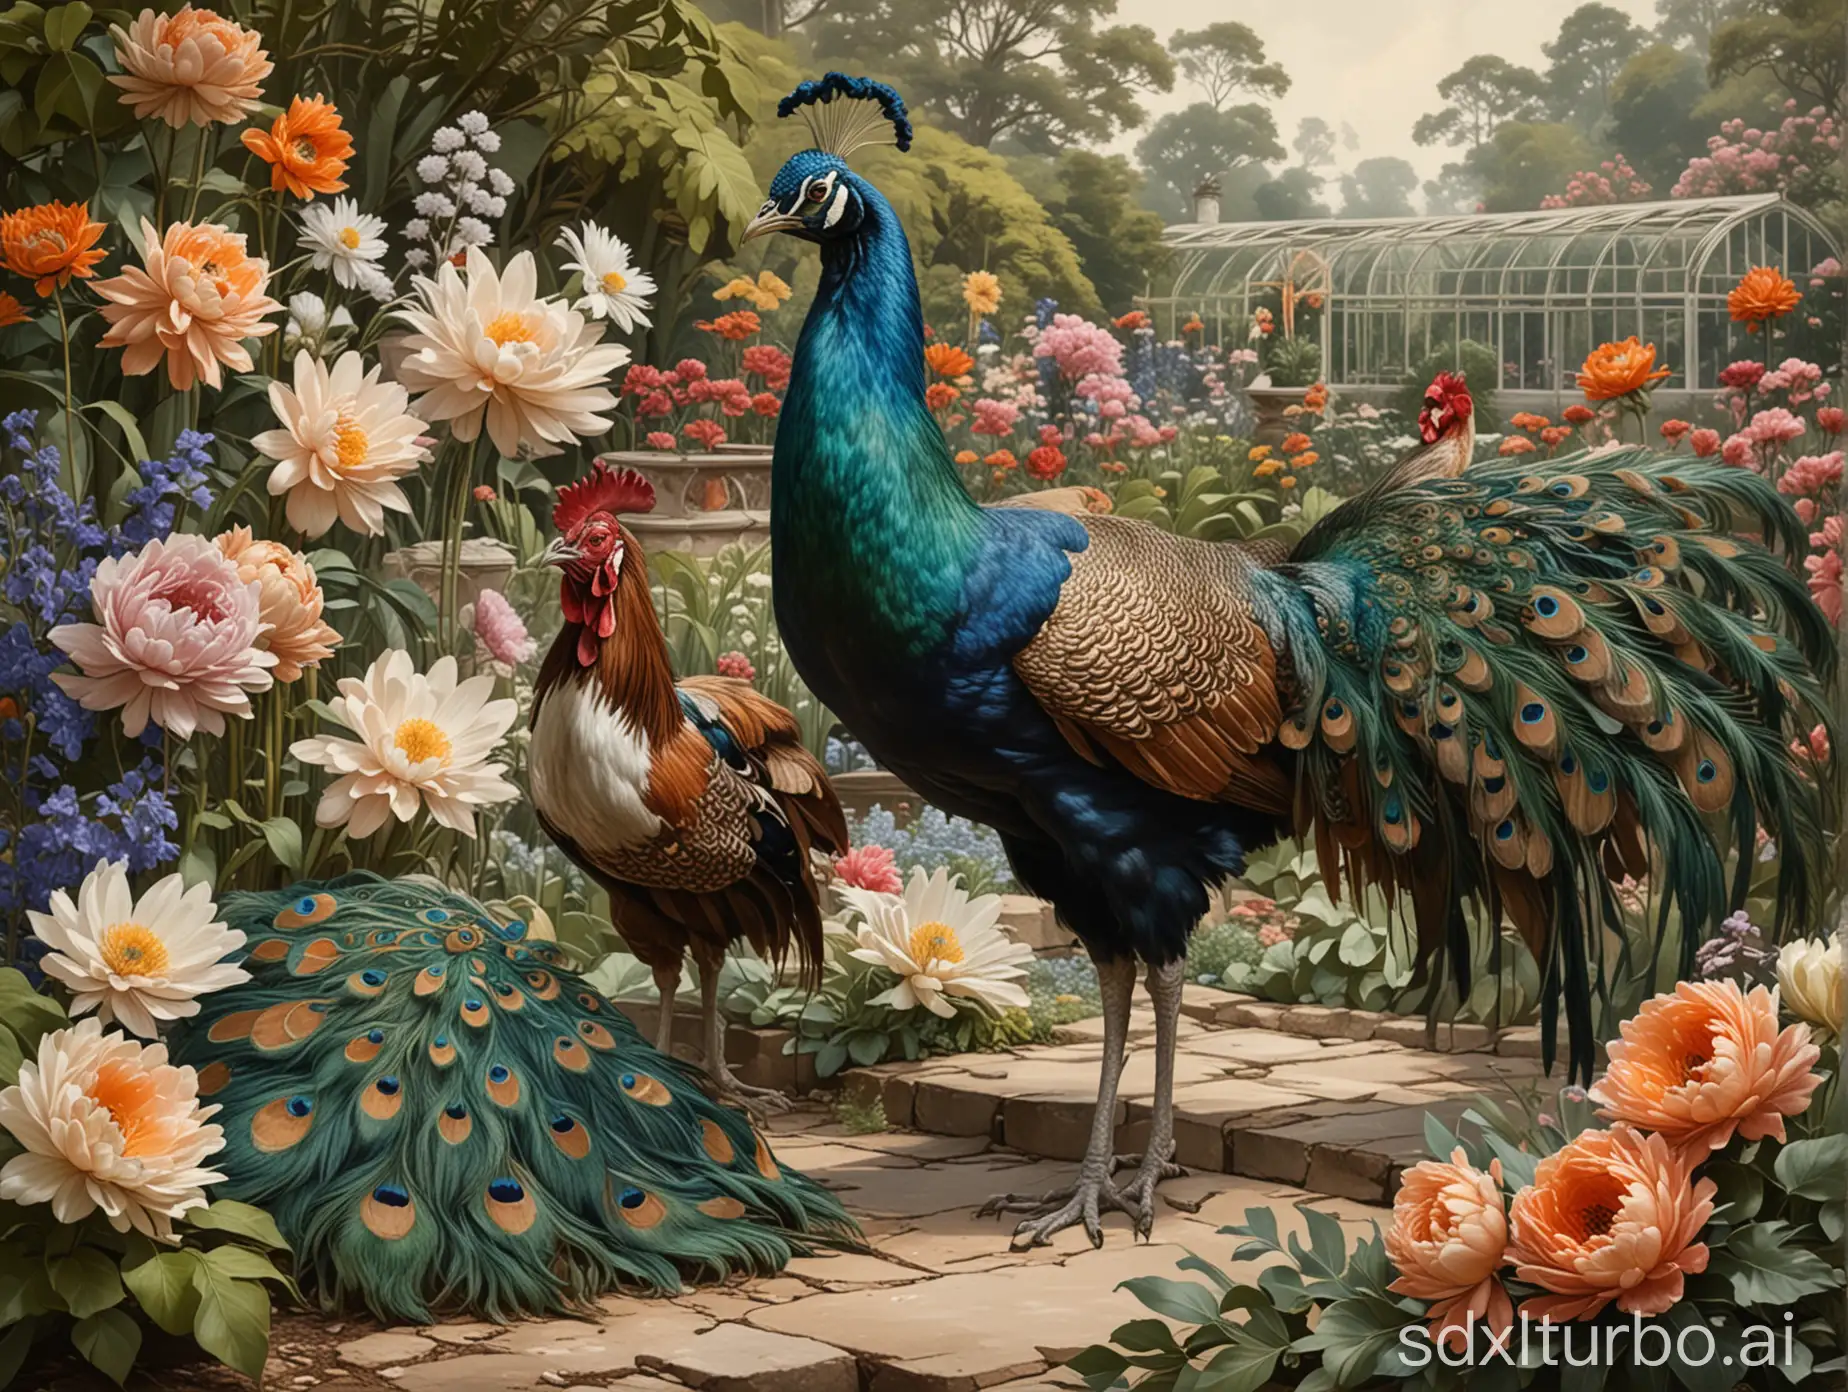 A full body shot of a peacock and a rooster. with a background of a rocky glasshouse flower garden, in the style of painting by Leyendecker.